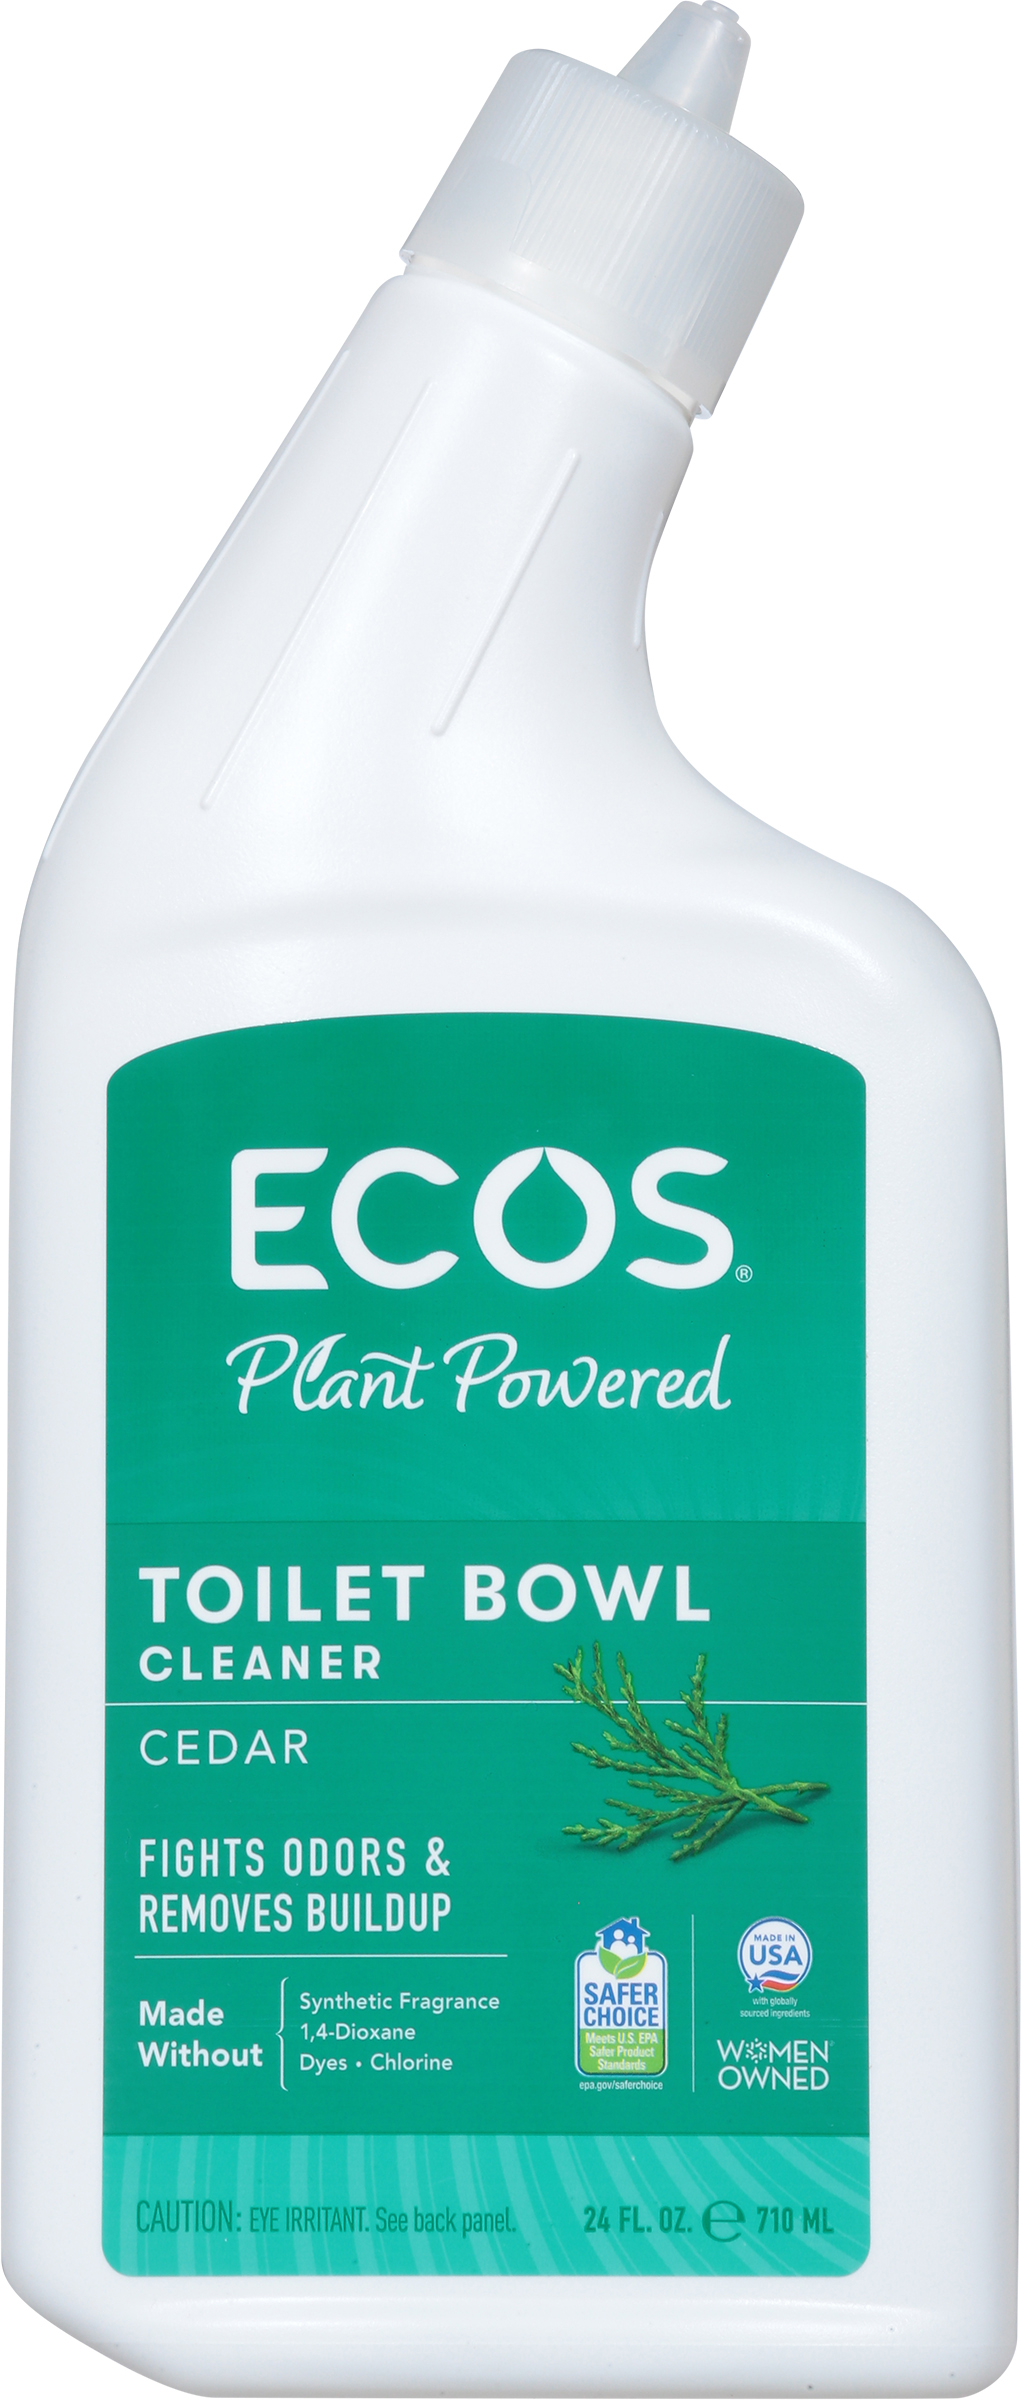 ECOS Toilet Bowl Cleaner, 24 Oz - image 3 of 3